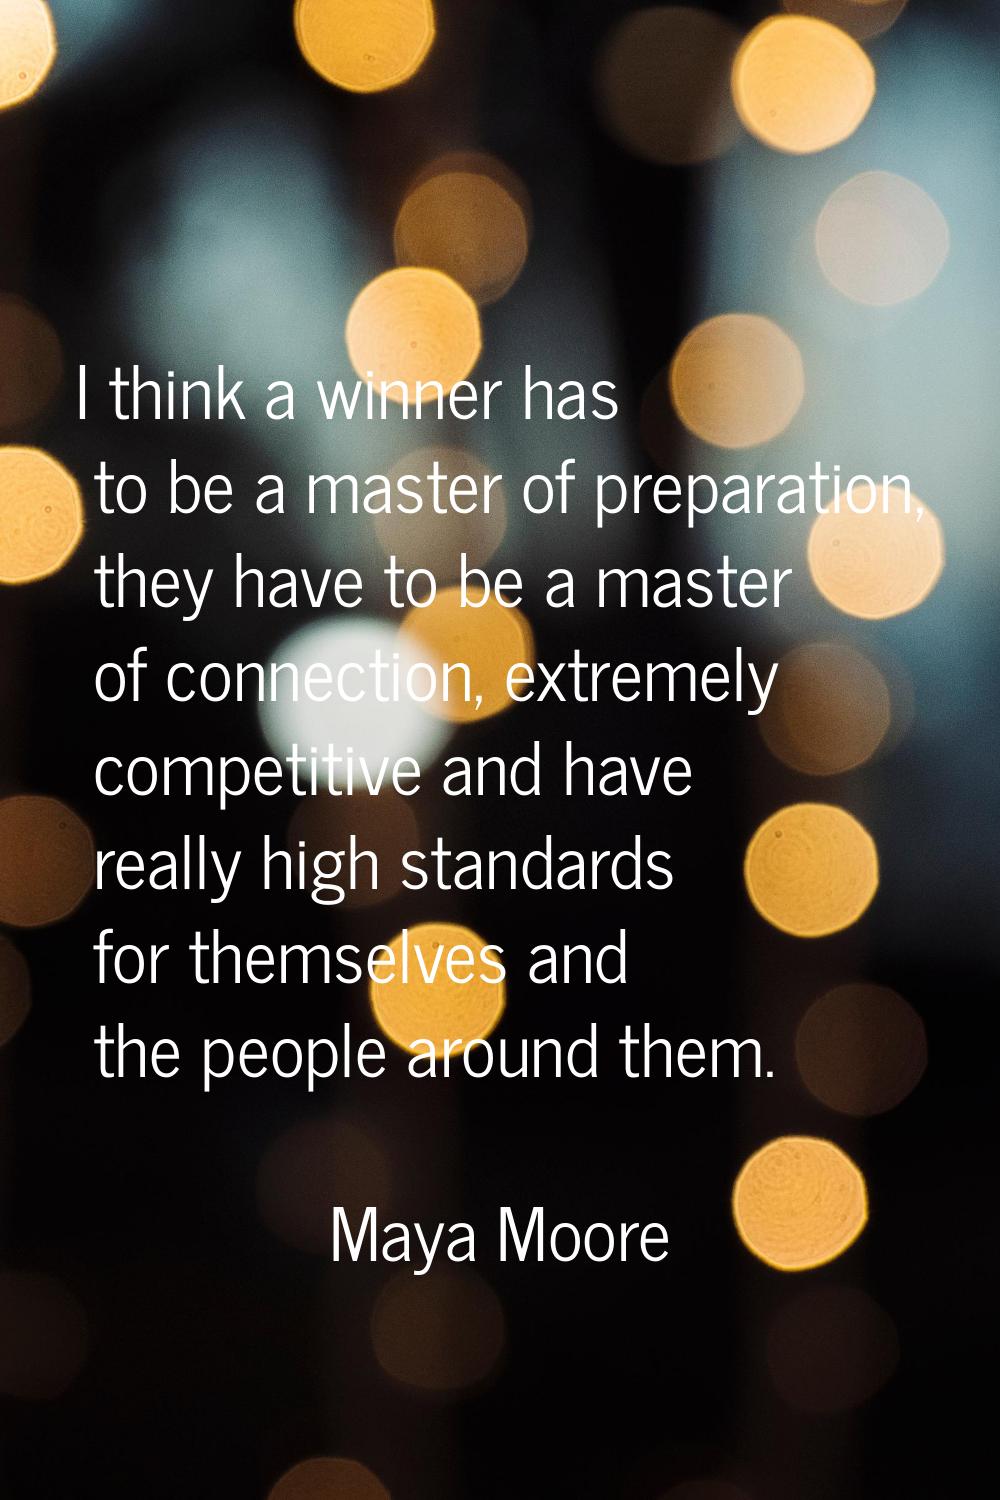 I think a winner has to be a master of preparation, they have to be a master of connection, extreme